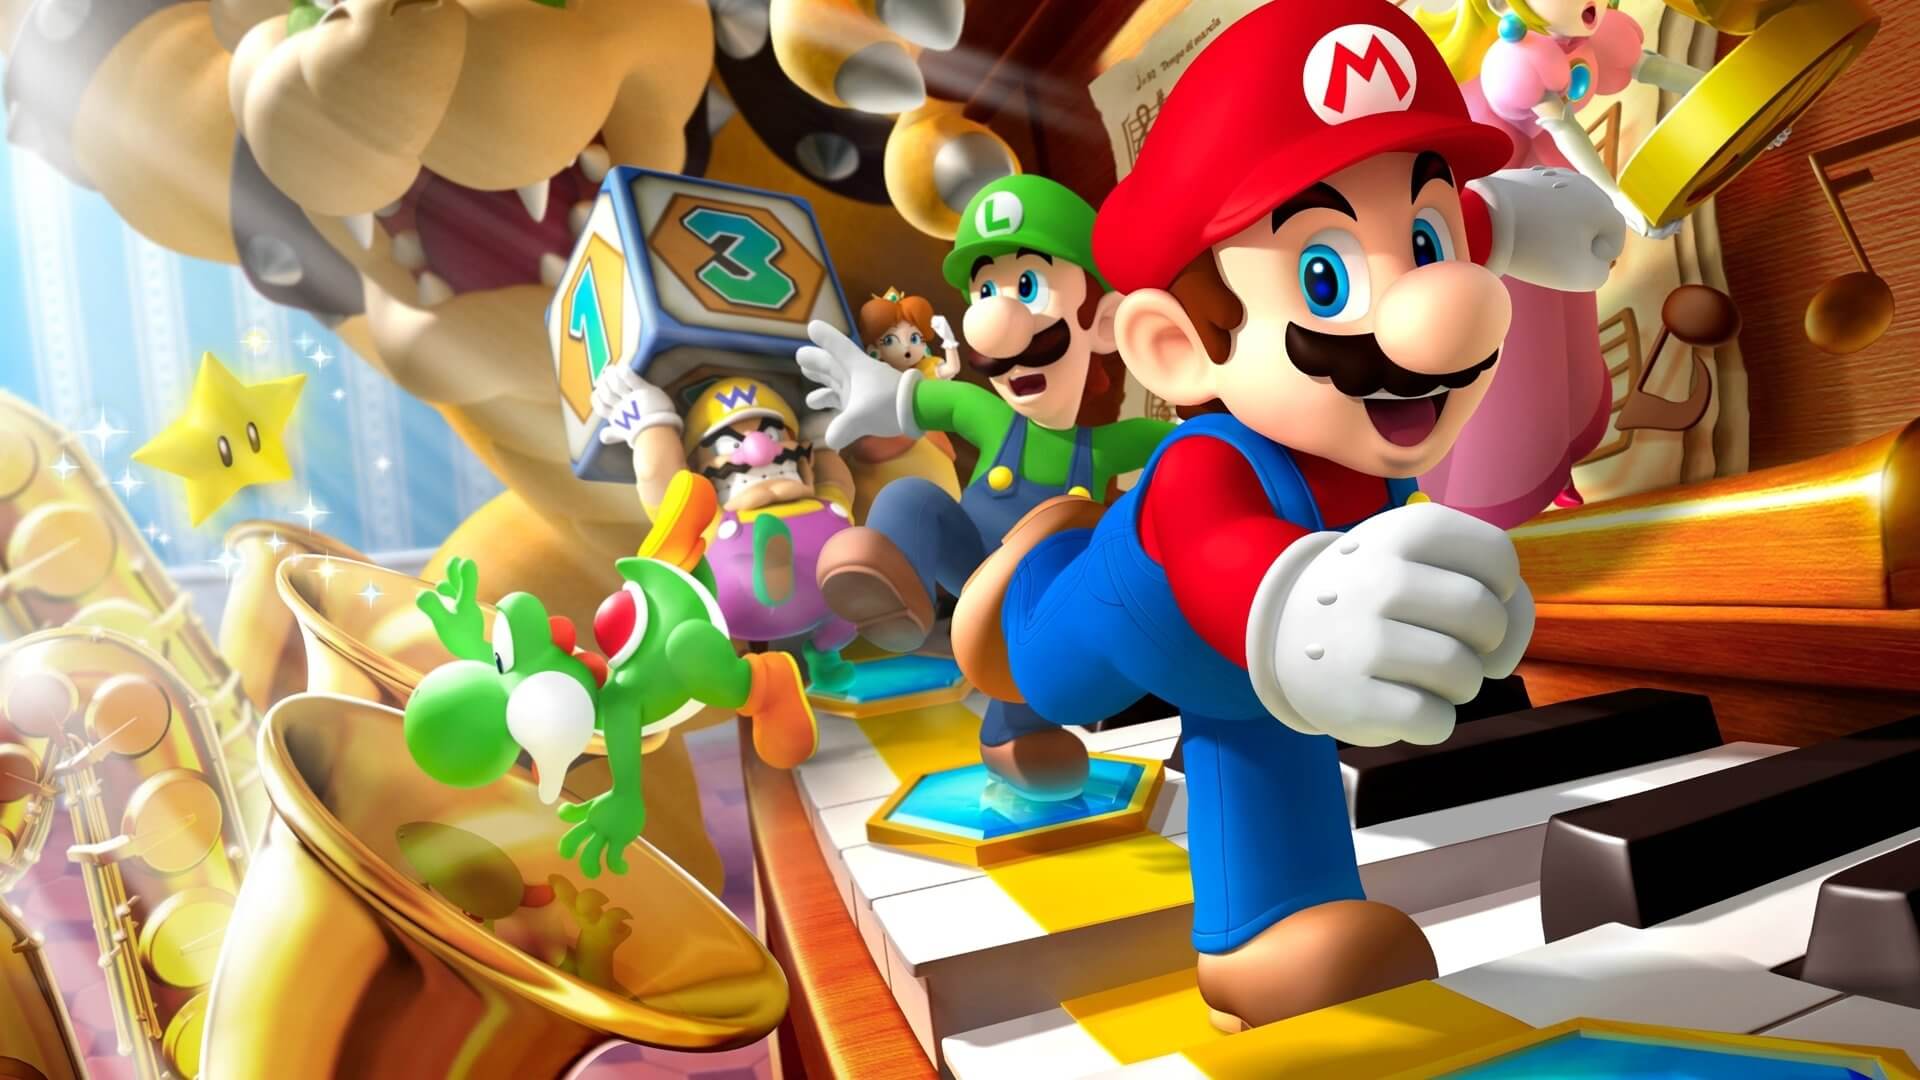 Nintendo gives first glimpse of upcoming Mario Bros. movie